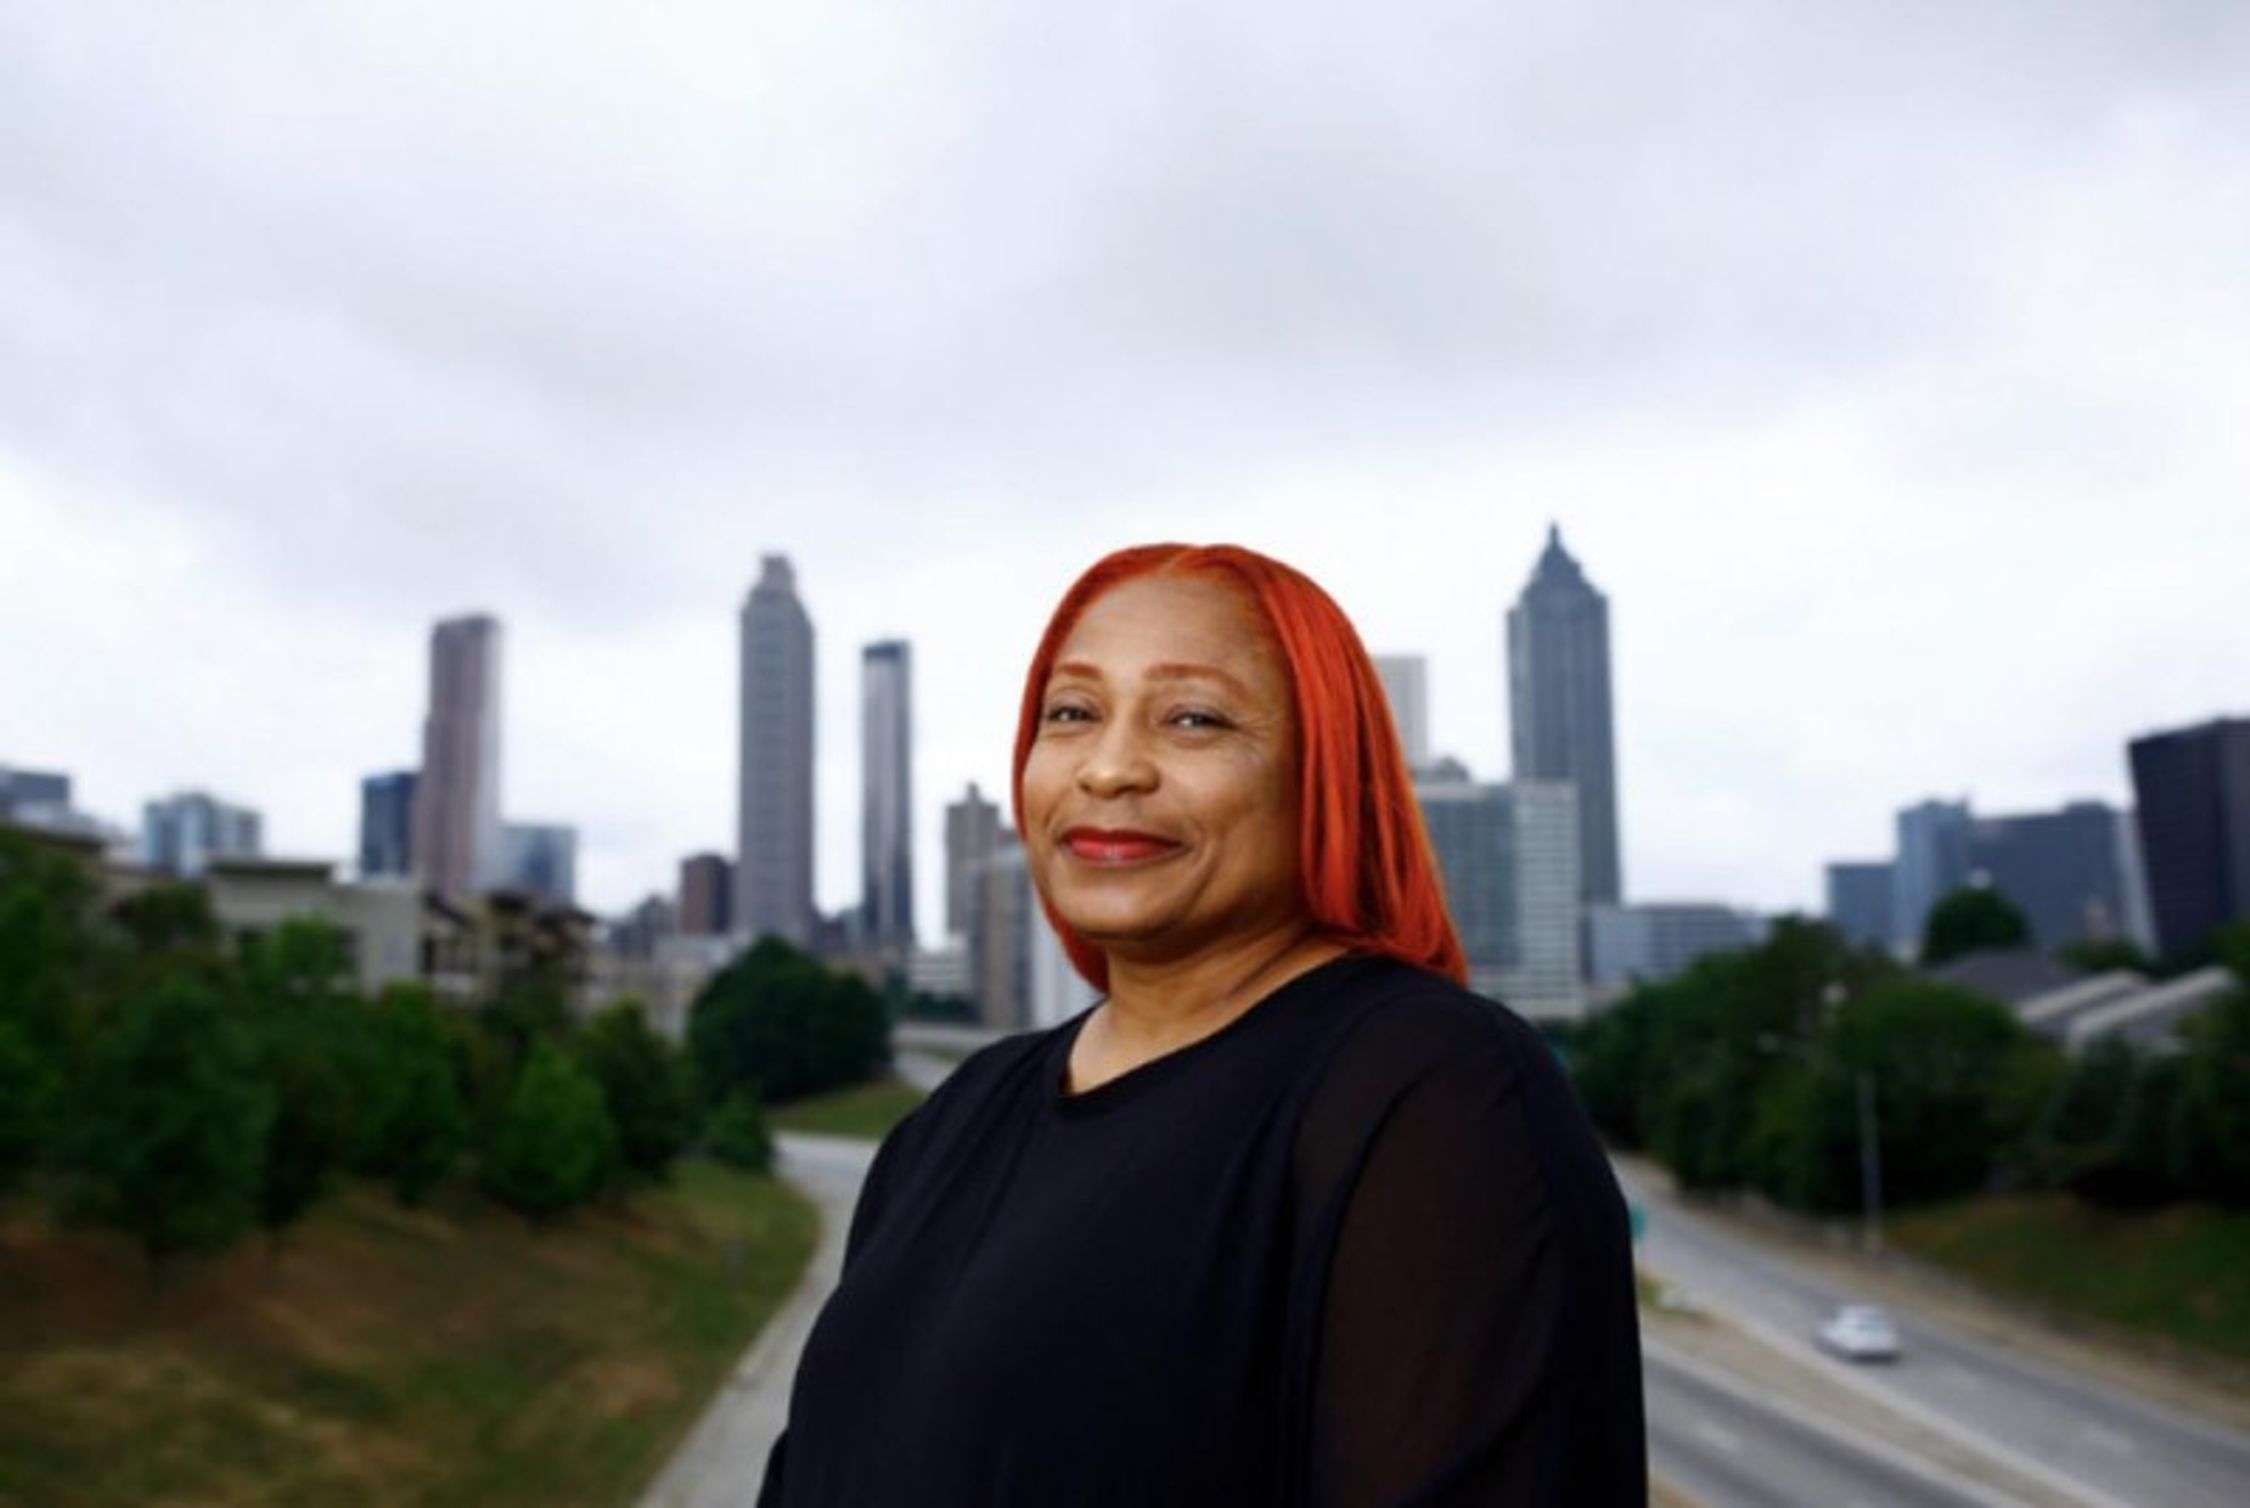 A person with shoulder-length bright red hair stands in the foreground, smiling slightly, with a blurred city skyline in the background. They are wearing a black top, and the overcast sky suggests a muted daylight setting. Below the skyline, there's a glimpse of a highway with moving vehicles, bordered by greenery. The focus on the individual with the cityscape backdrop creates a juxtaposition between the person and the urban environment.